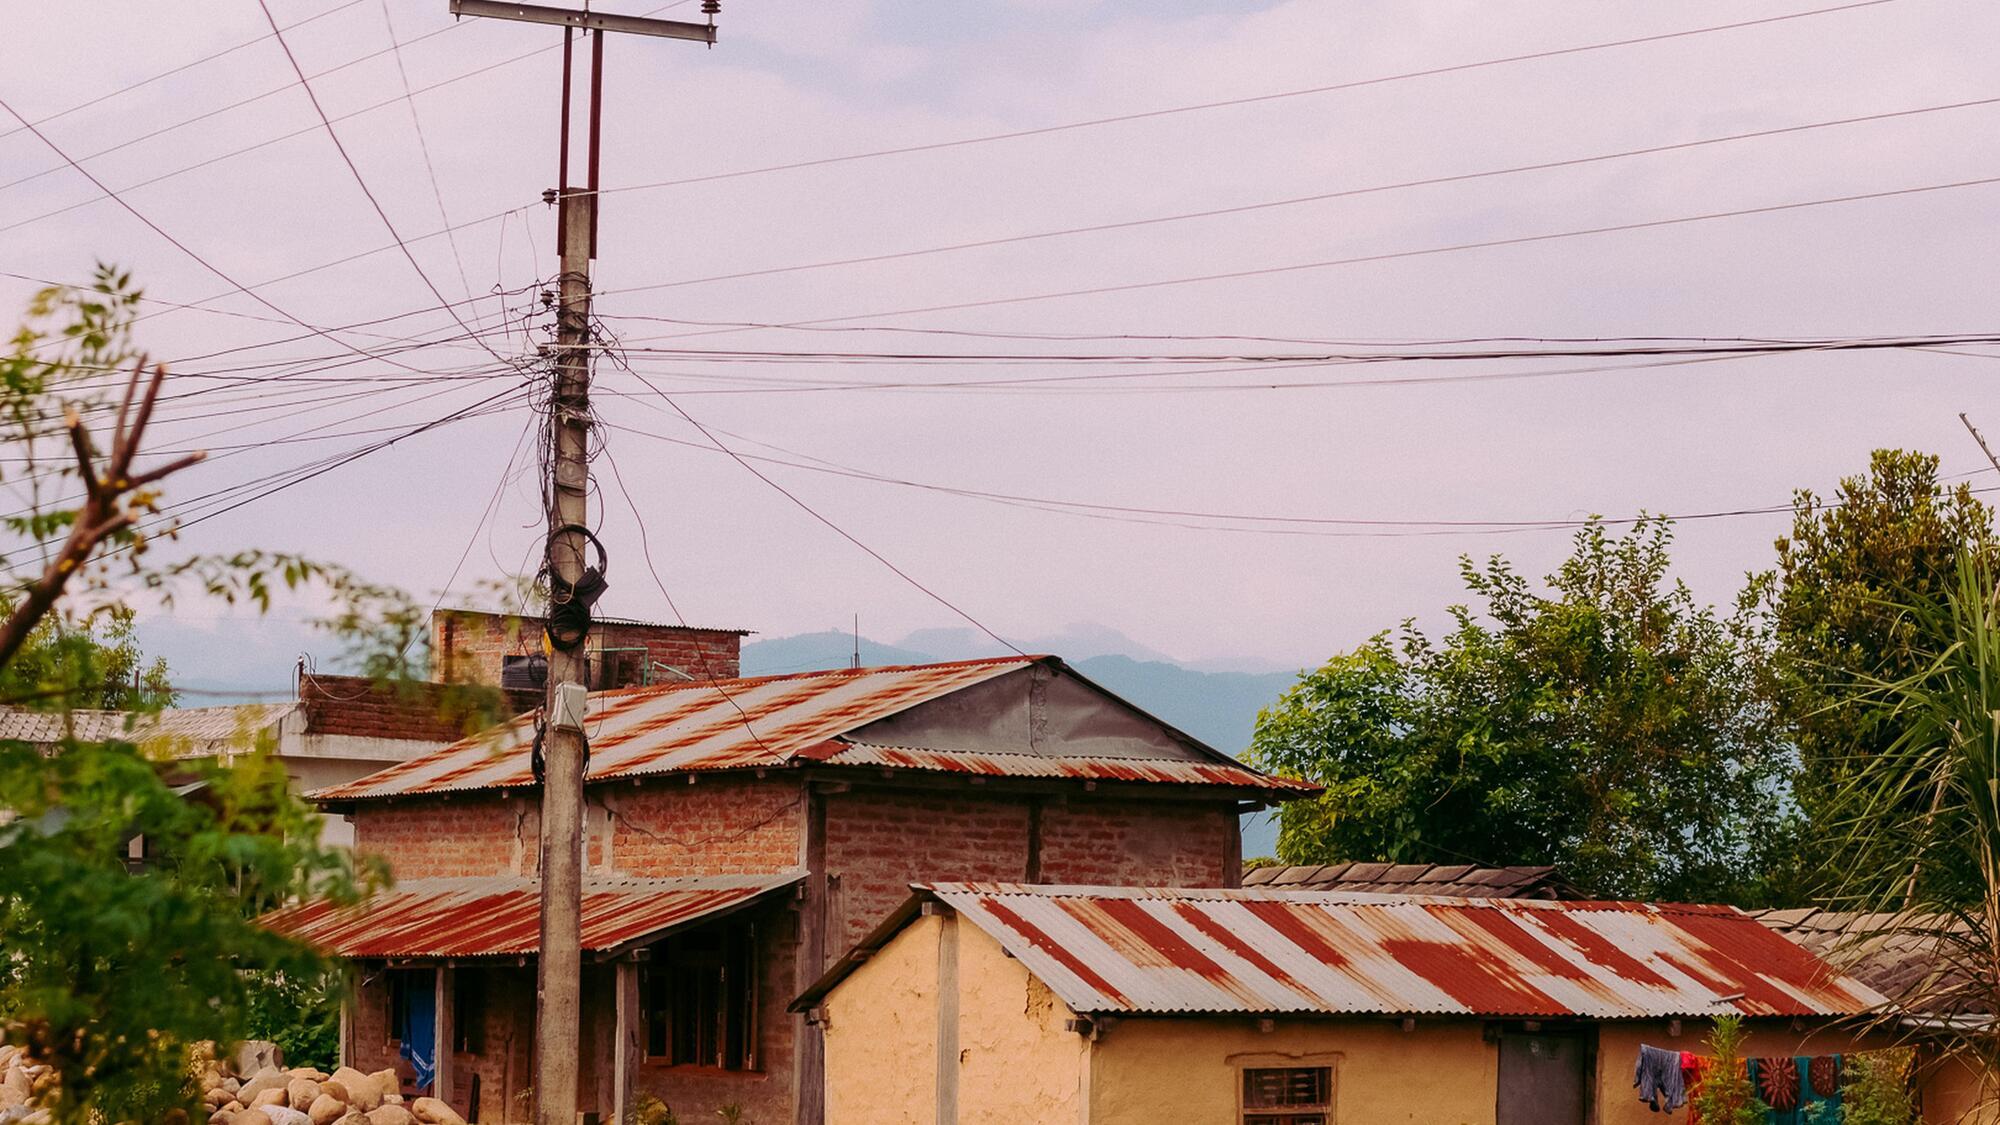 Small houses in Nepal under an electricity line in the countryside